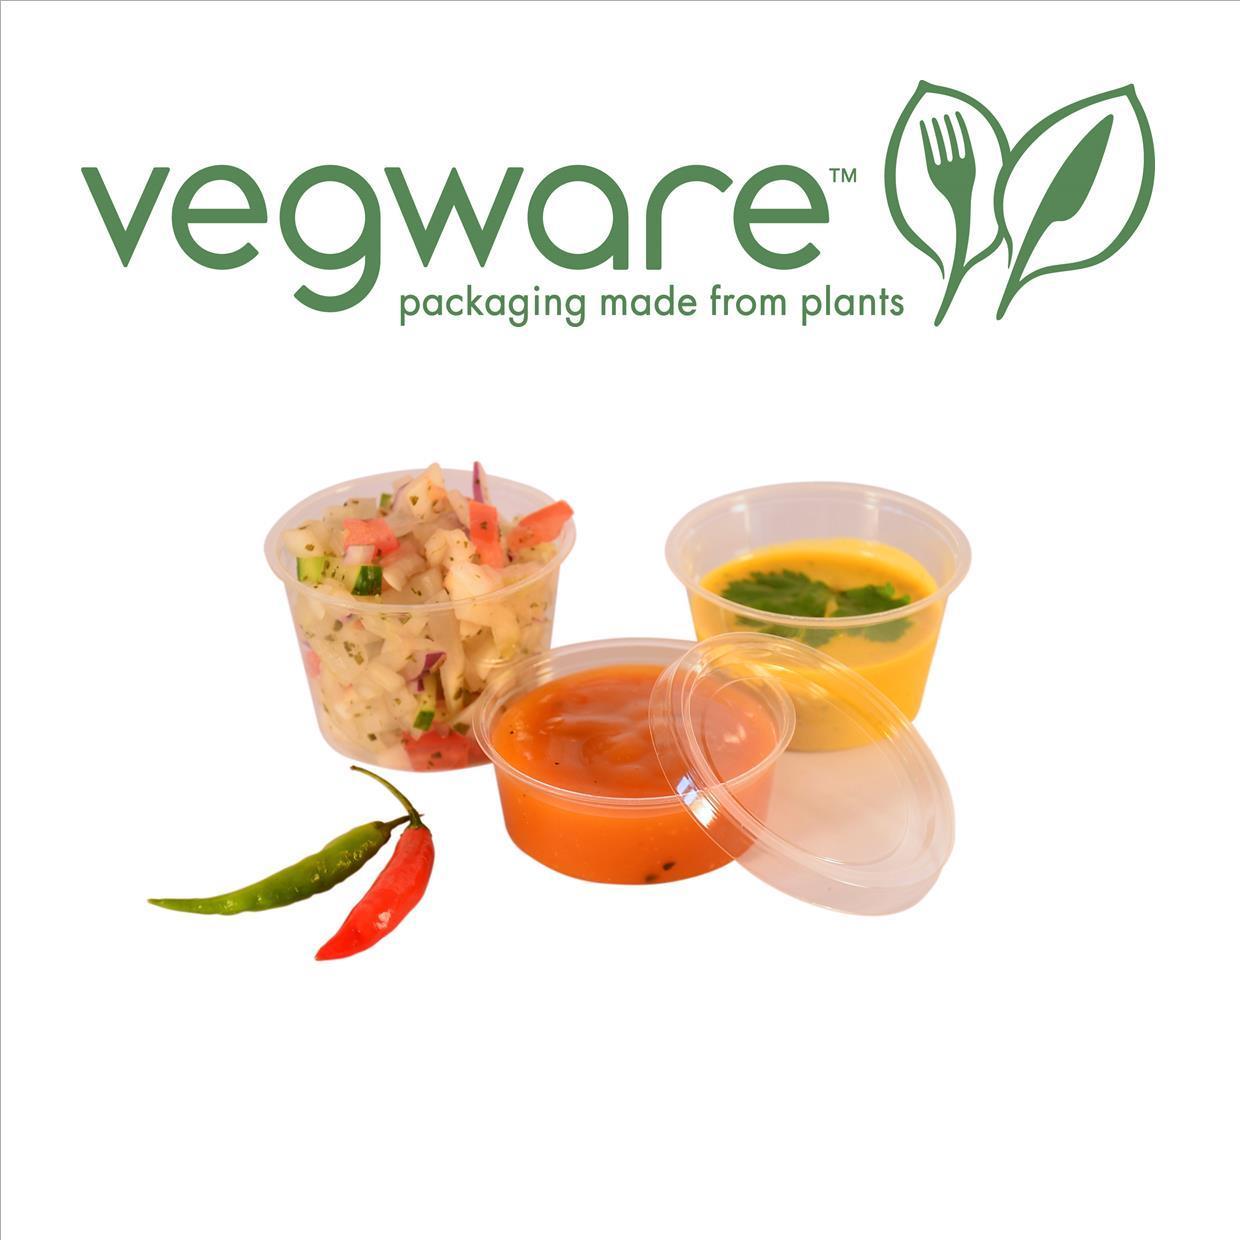 Commercially compostable 2-oz Portion Cups are made from plant-based PLA and are independently certified to break down in 12 weeks. Use for small portions of any foods or liquids.